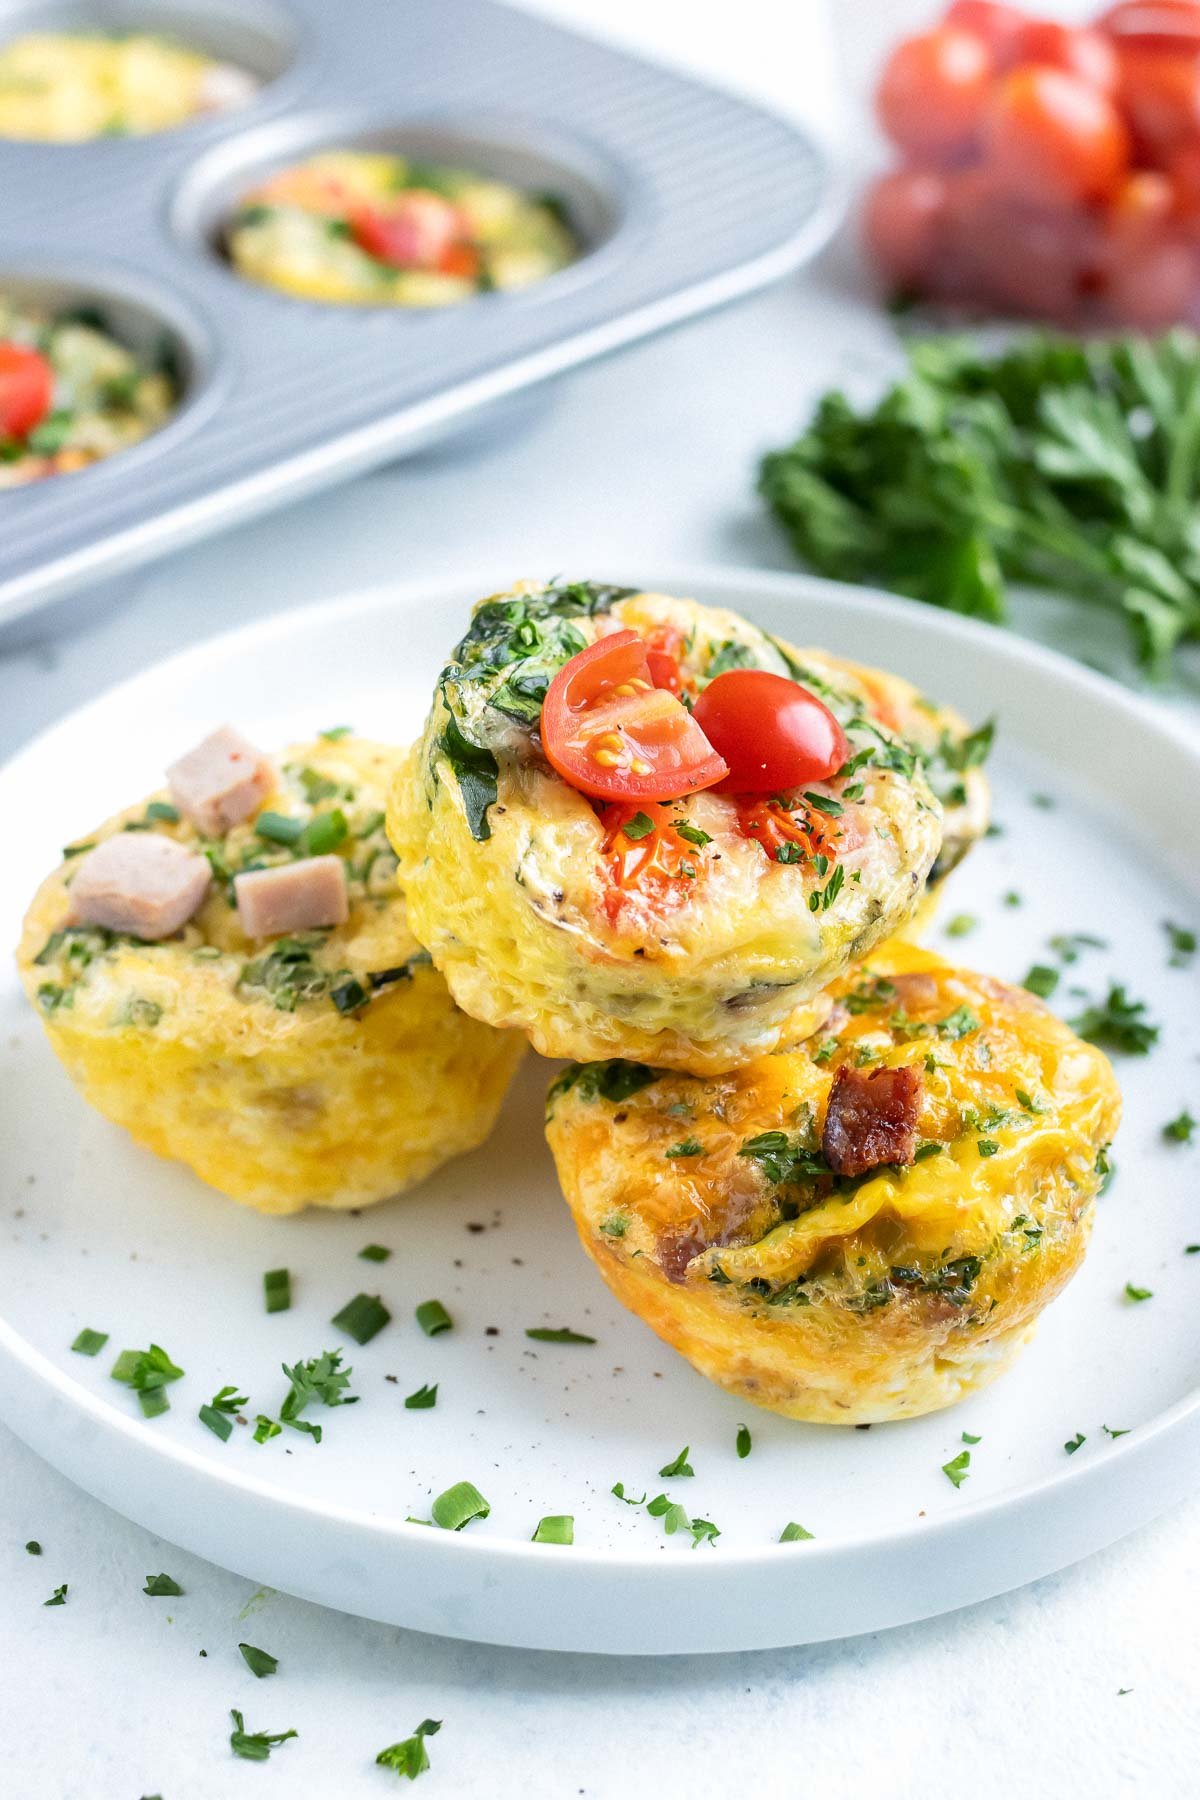 Keto egg cups are served on a plate with fresh herbs.